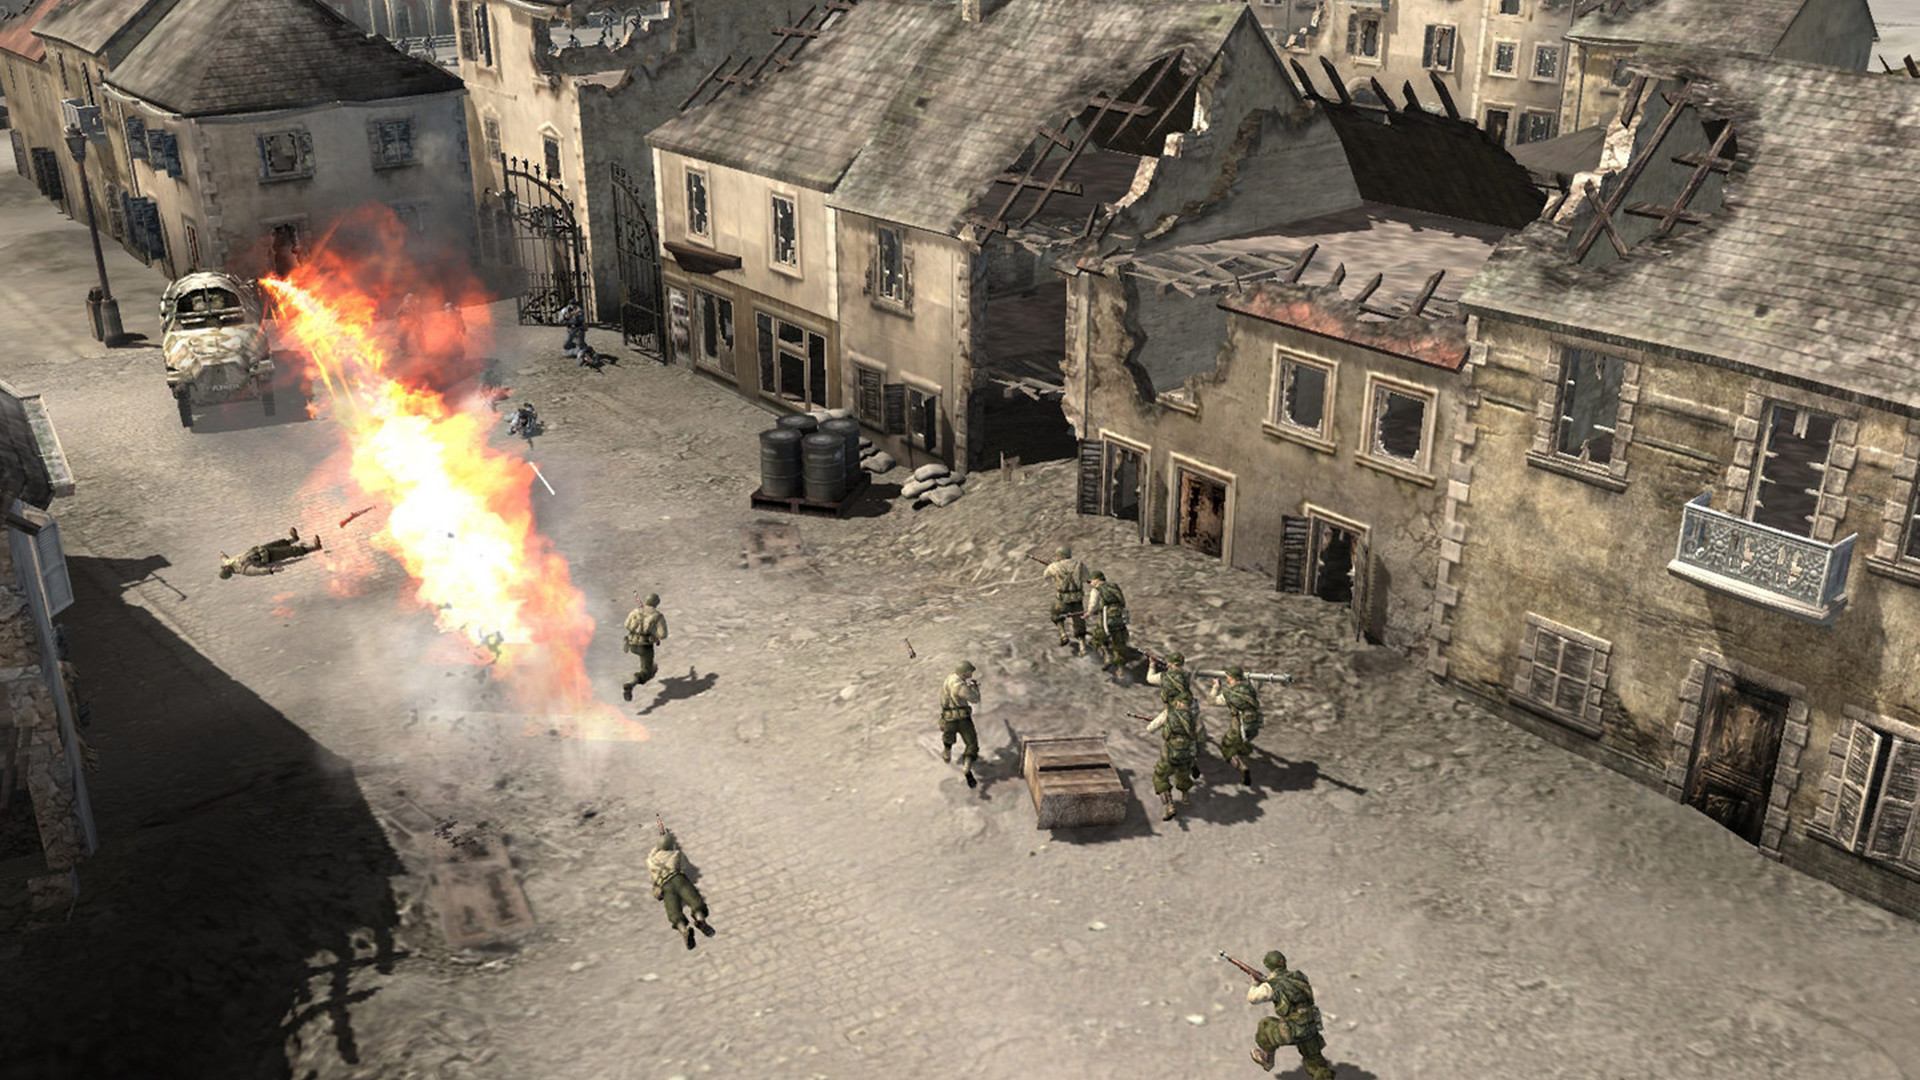 company of heroes steam edition graphics mod